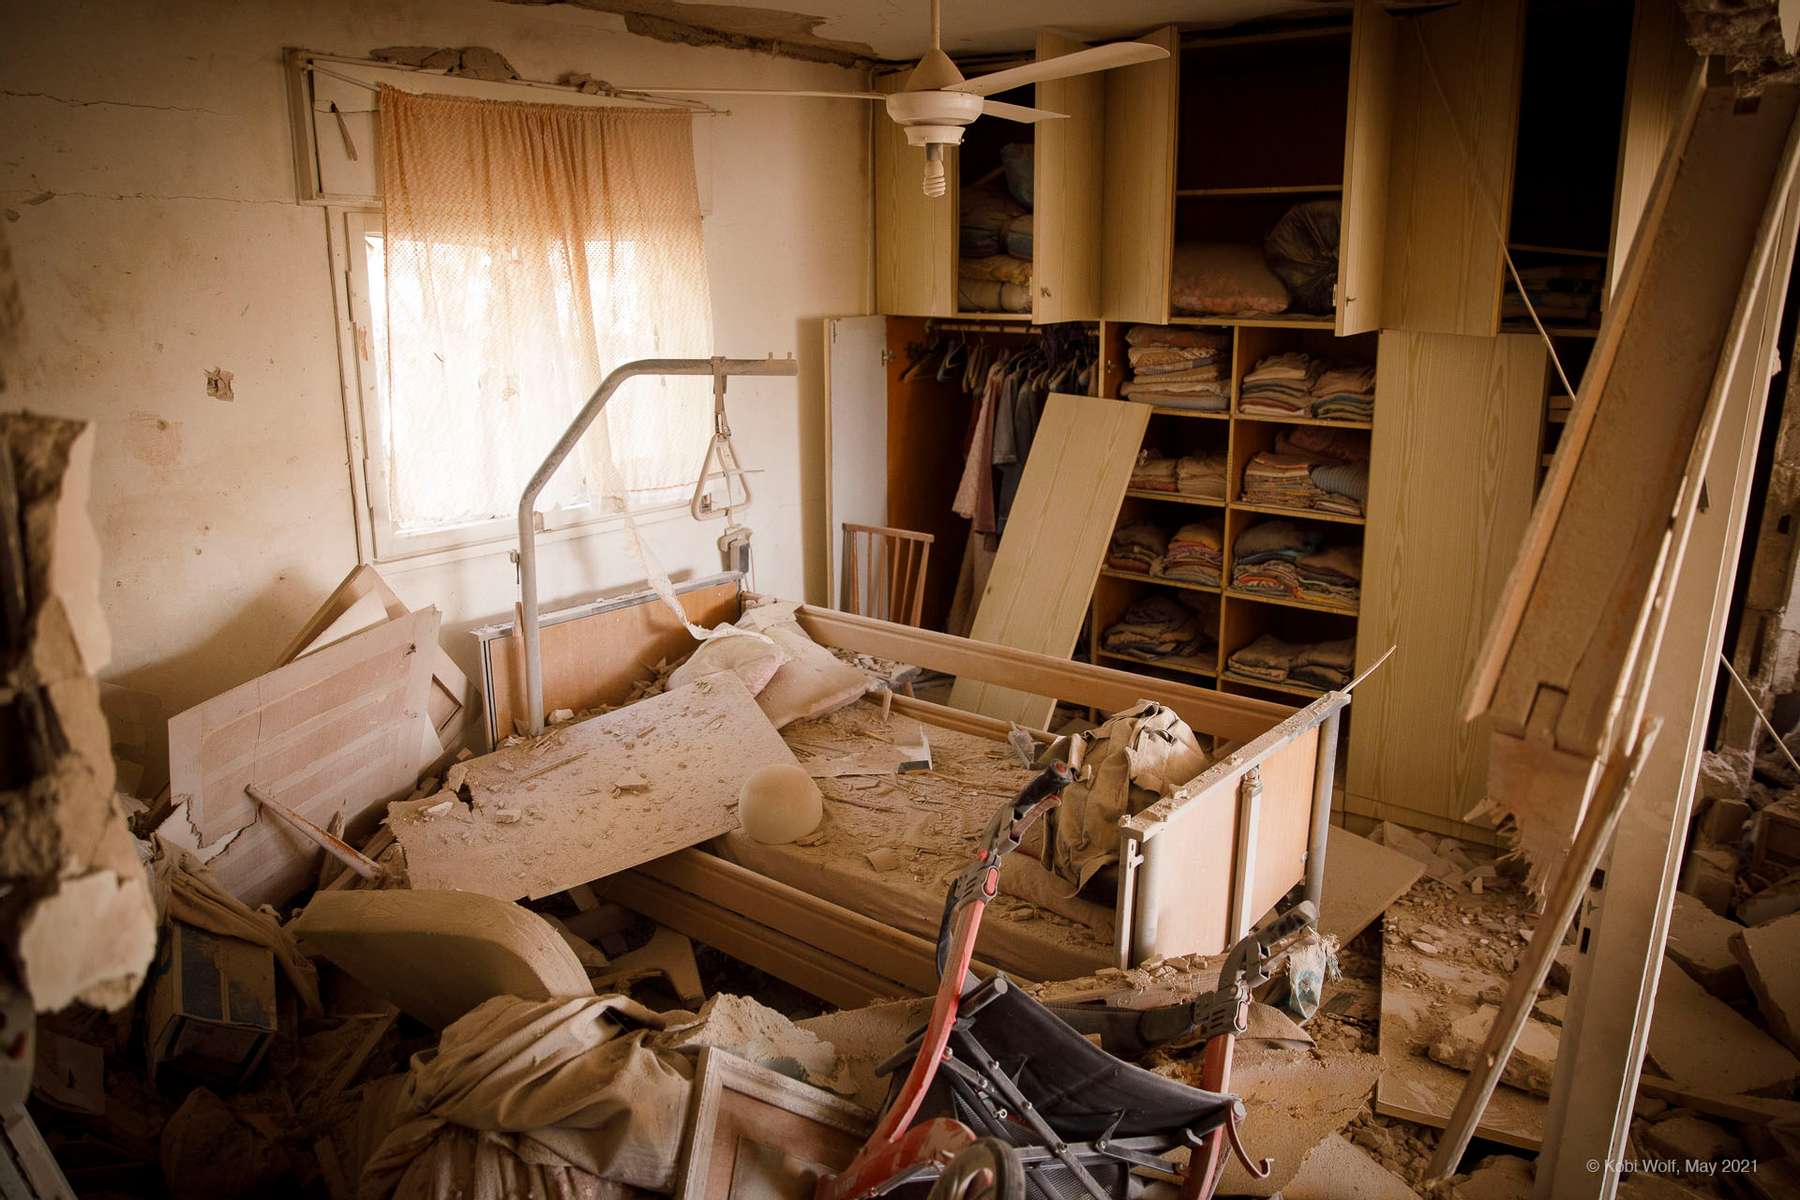 The room of the old lady who killed in her home when her house hit a direct rocket in Ashkelon, Israel on May 11 2021 photographer: Kobi Wolf